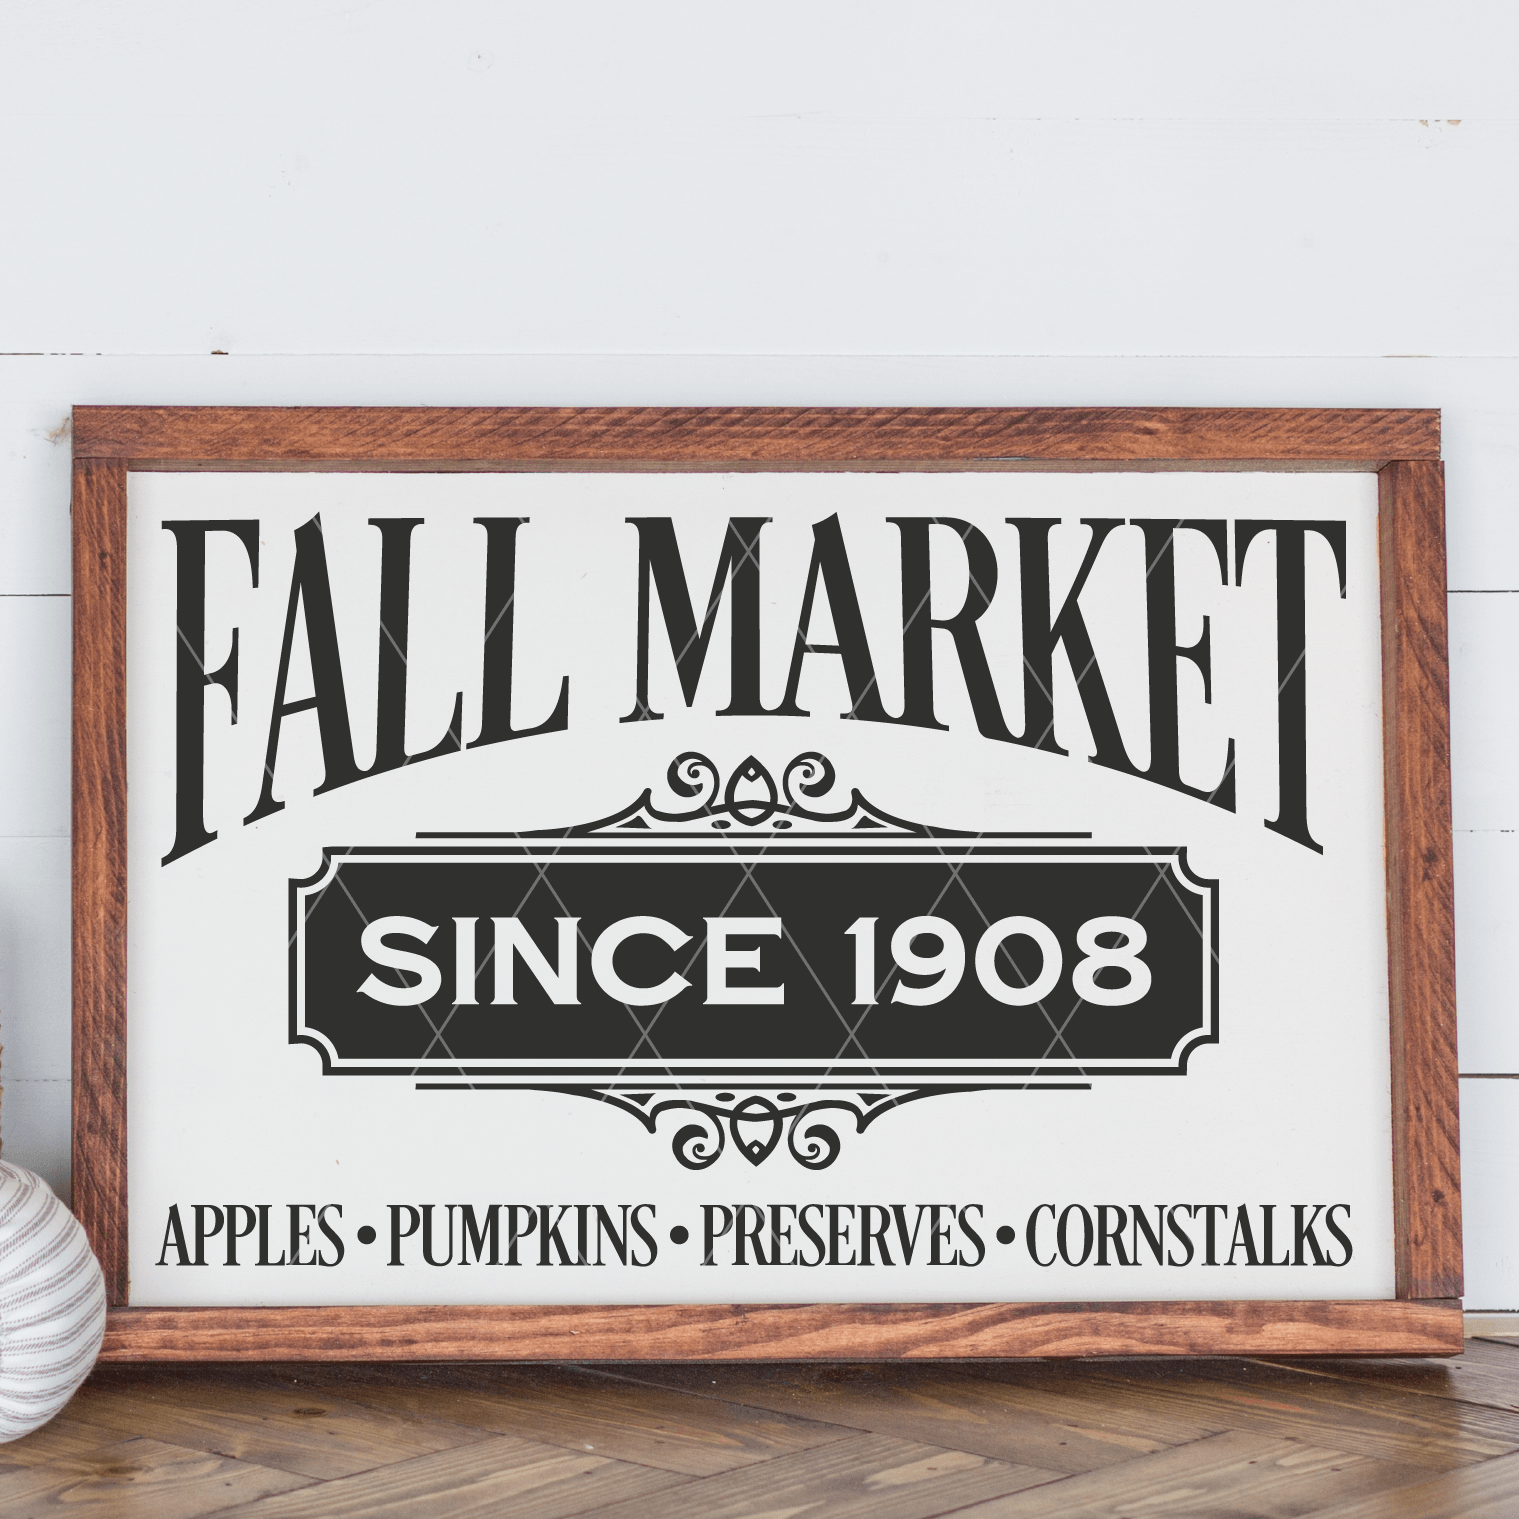 Vintage Style Fall Market SVG Cut File - Commercial Use SVG Files for Cricut & Silhouette